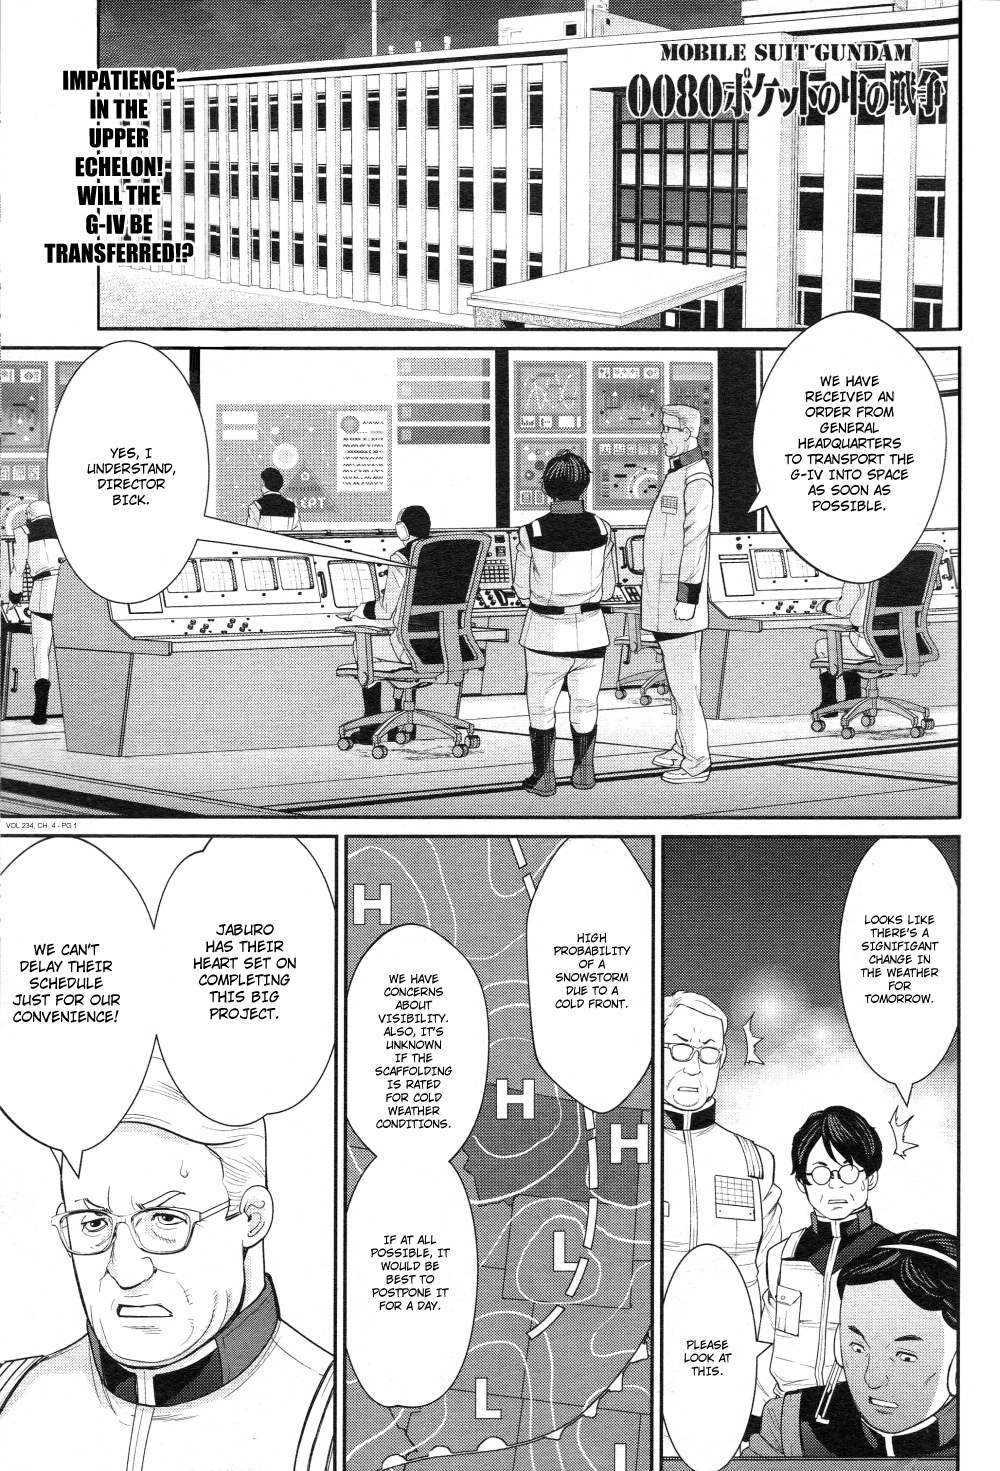 Mobile Suit Gundam 0080 - War In The Pocket Chapter 4 #1